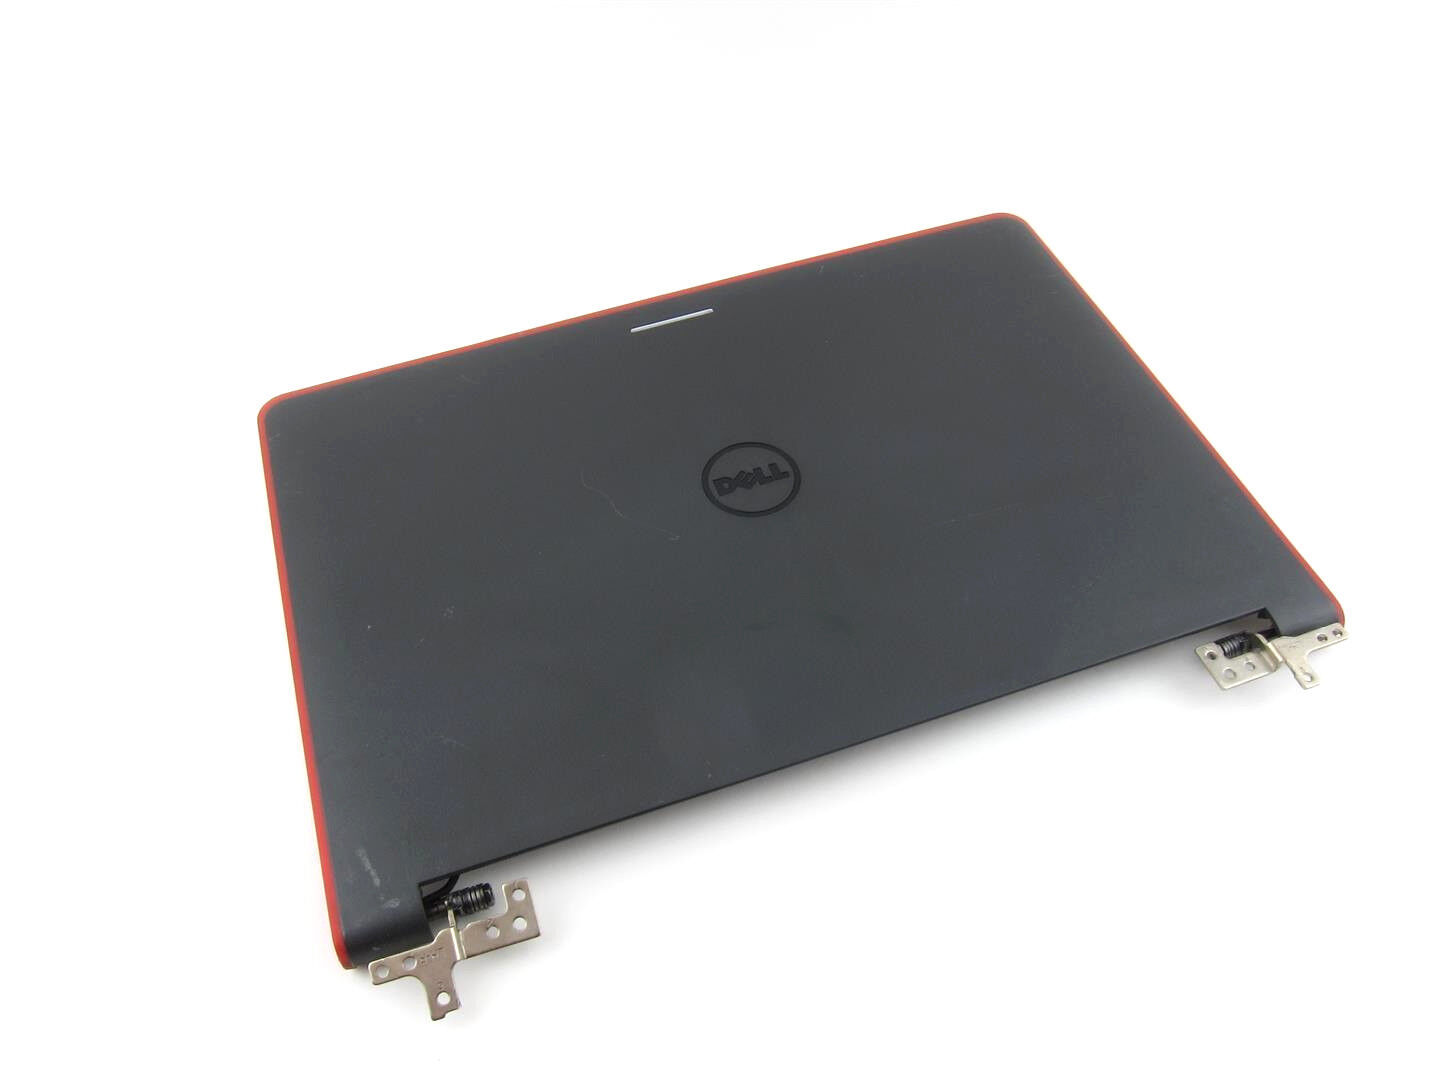 Dell Latitude 3150 LCD Back Cover Lid and Hinge Assembly 524 - WWGT5 0WWGT5 (B) - $19.95